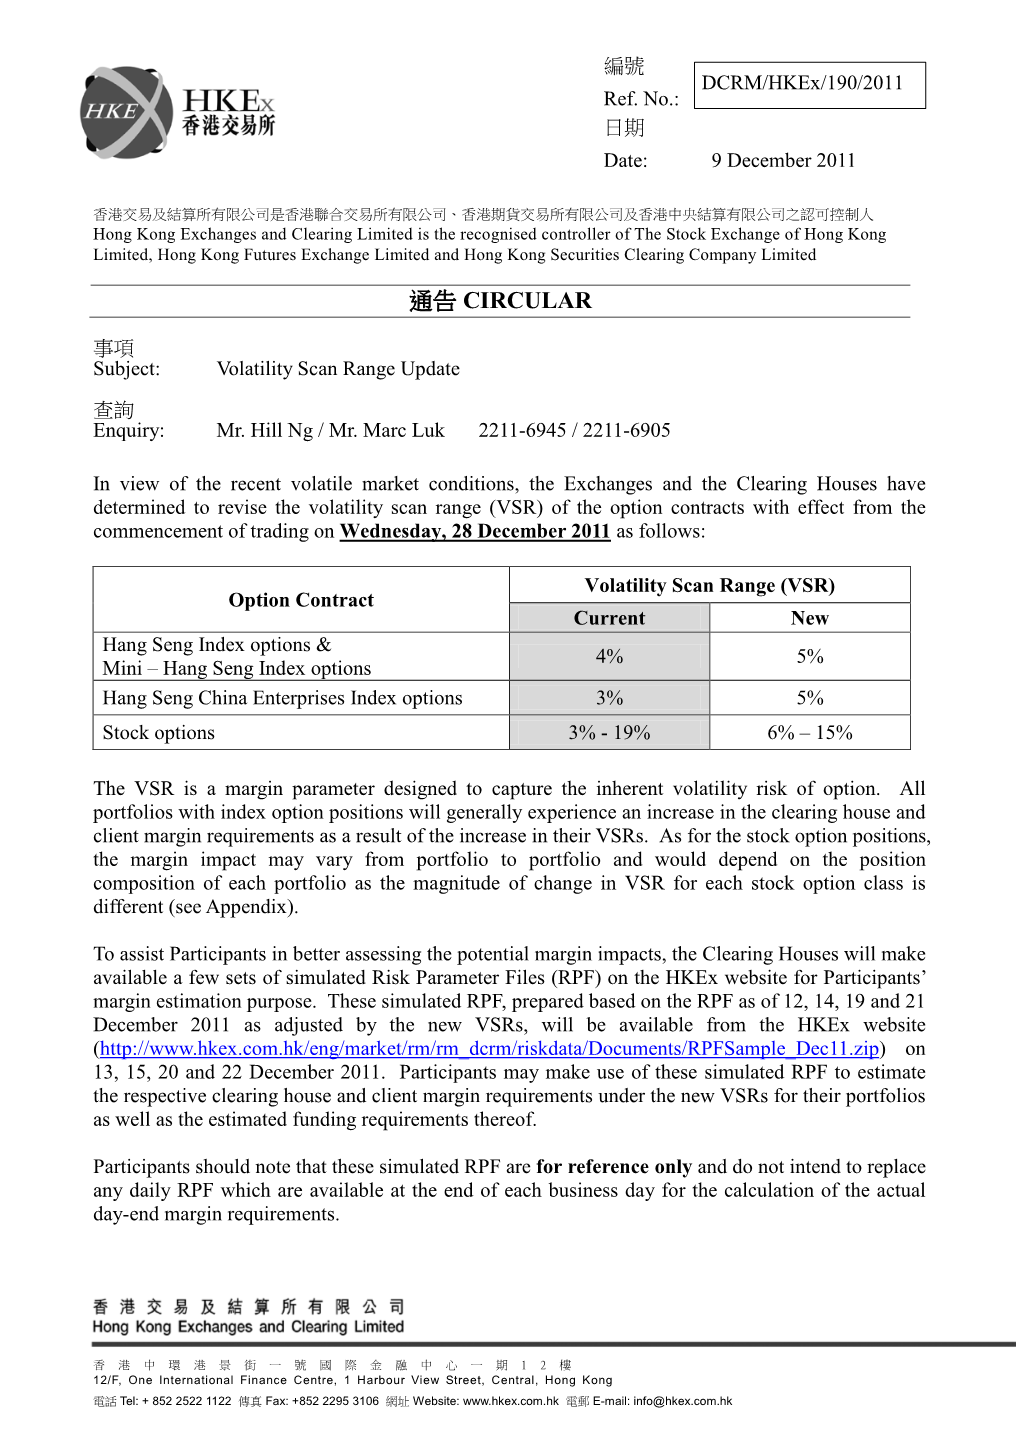 The Stock Exchange of Hong Kong Limited, Hong Kong Futures Exchange Limited and Hong Kong Securities Clearing Company Limited